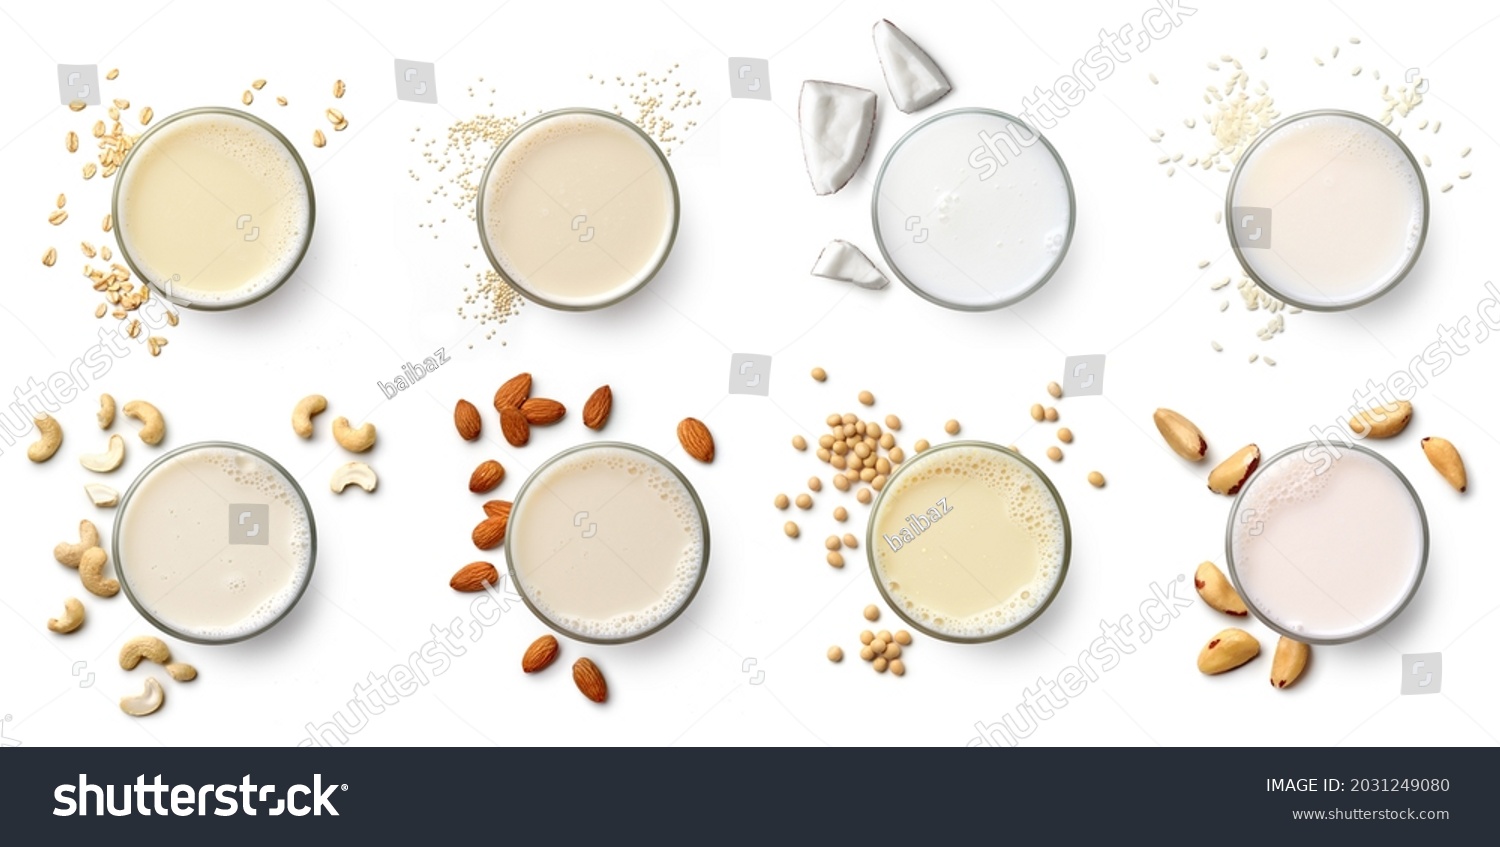 Set or collection of various vegan milk (almond, soy, rice, coconut, quinoja, brazil nut, cashew, oat) isolated on white background, top view. Dairy free, plant based drink. #2031249080